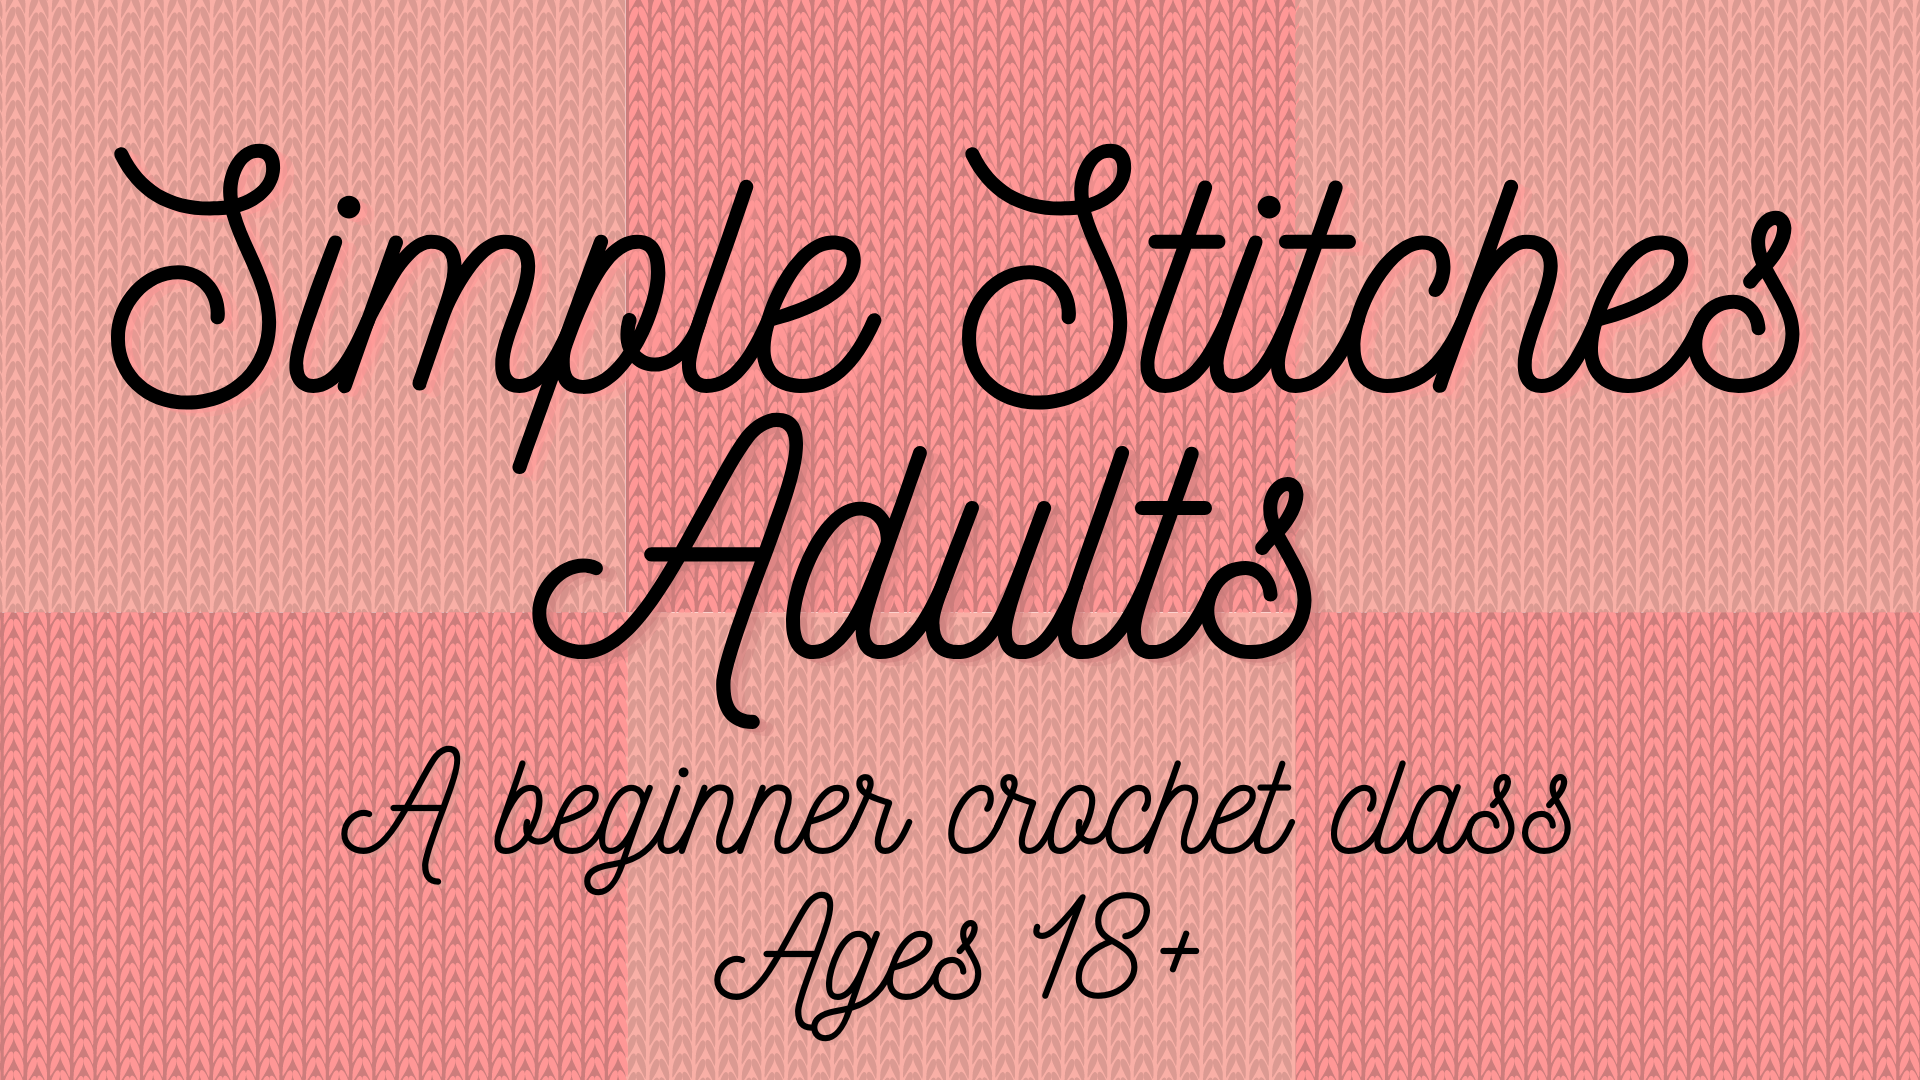 Simple Stitches Adults a beginner crochet class ages 12-18